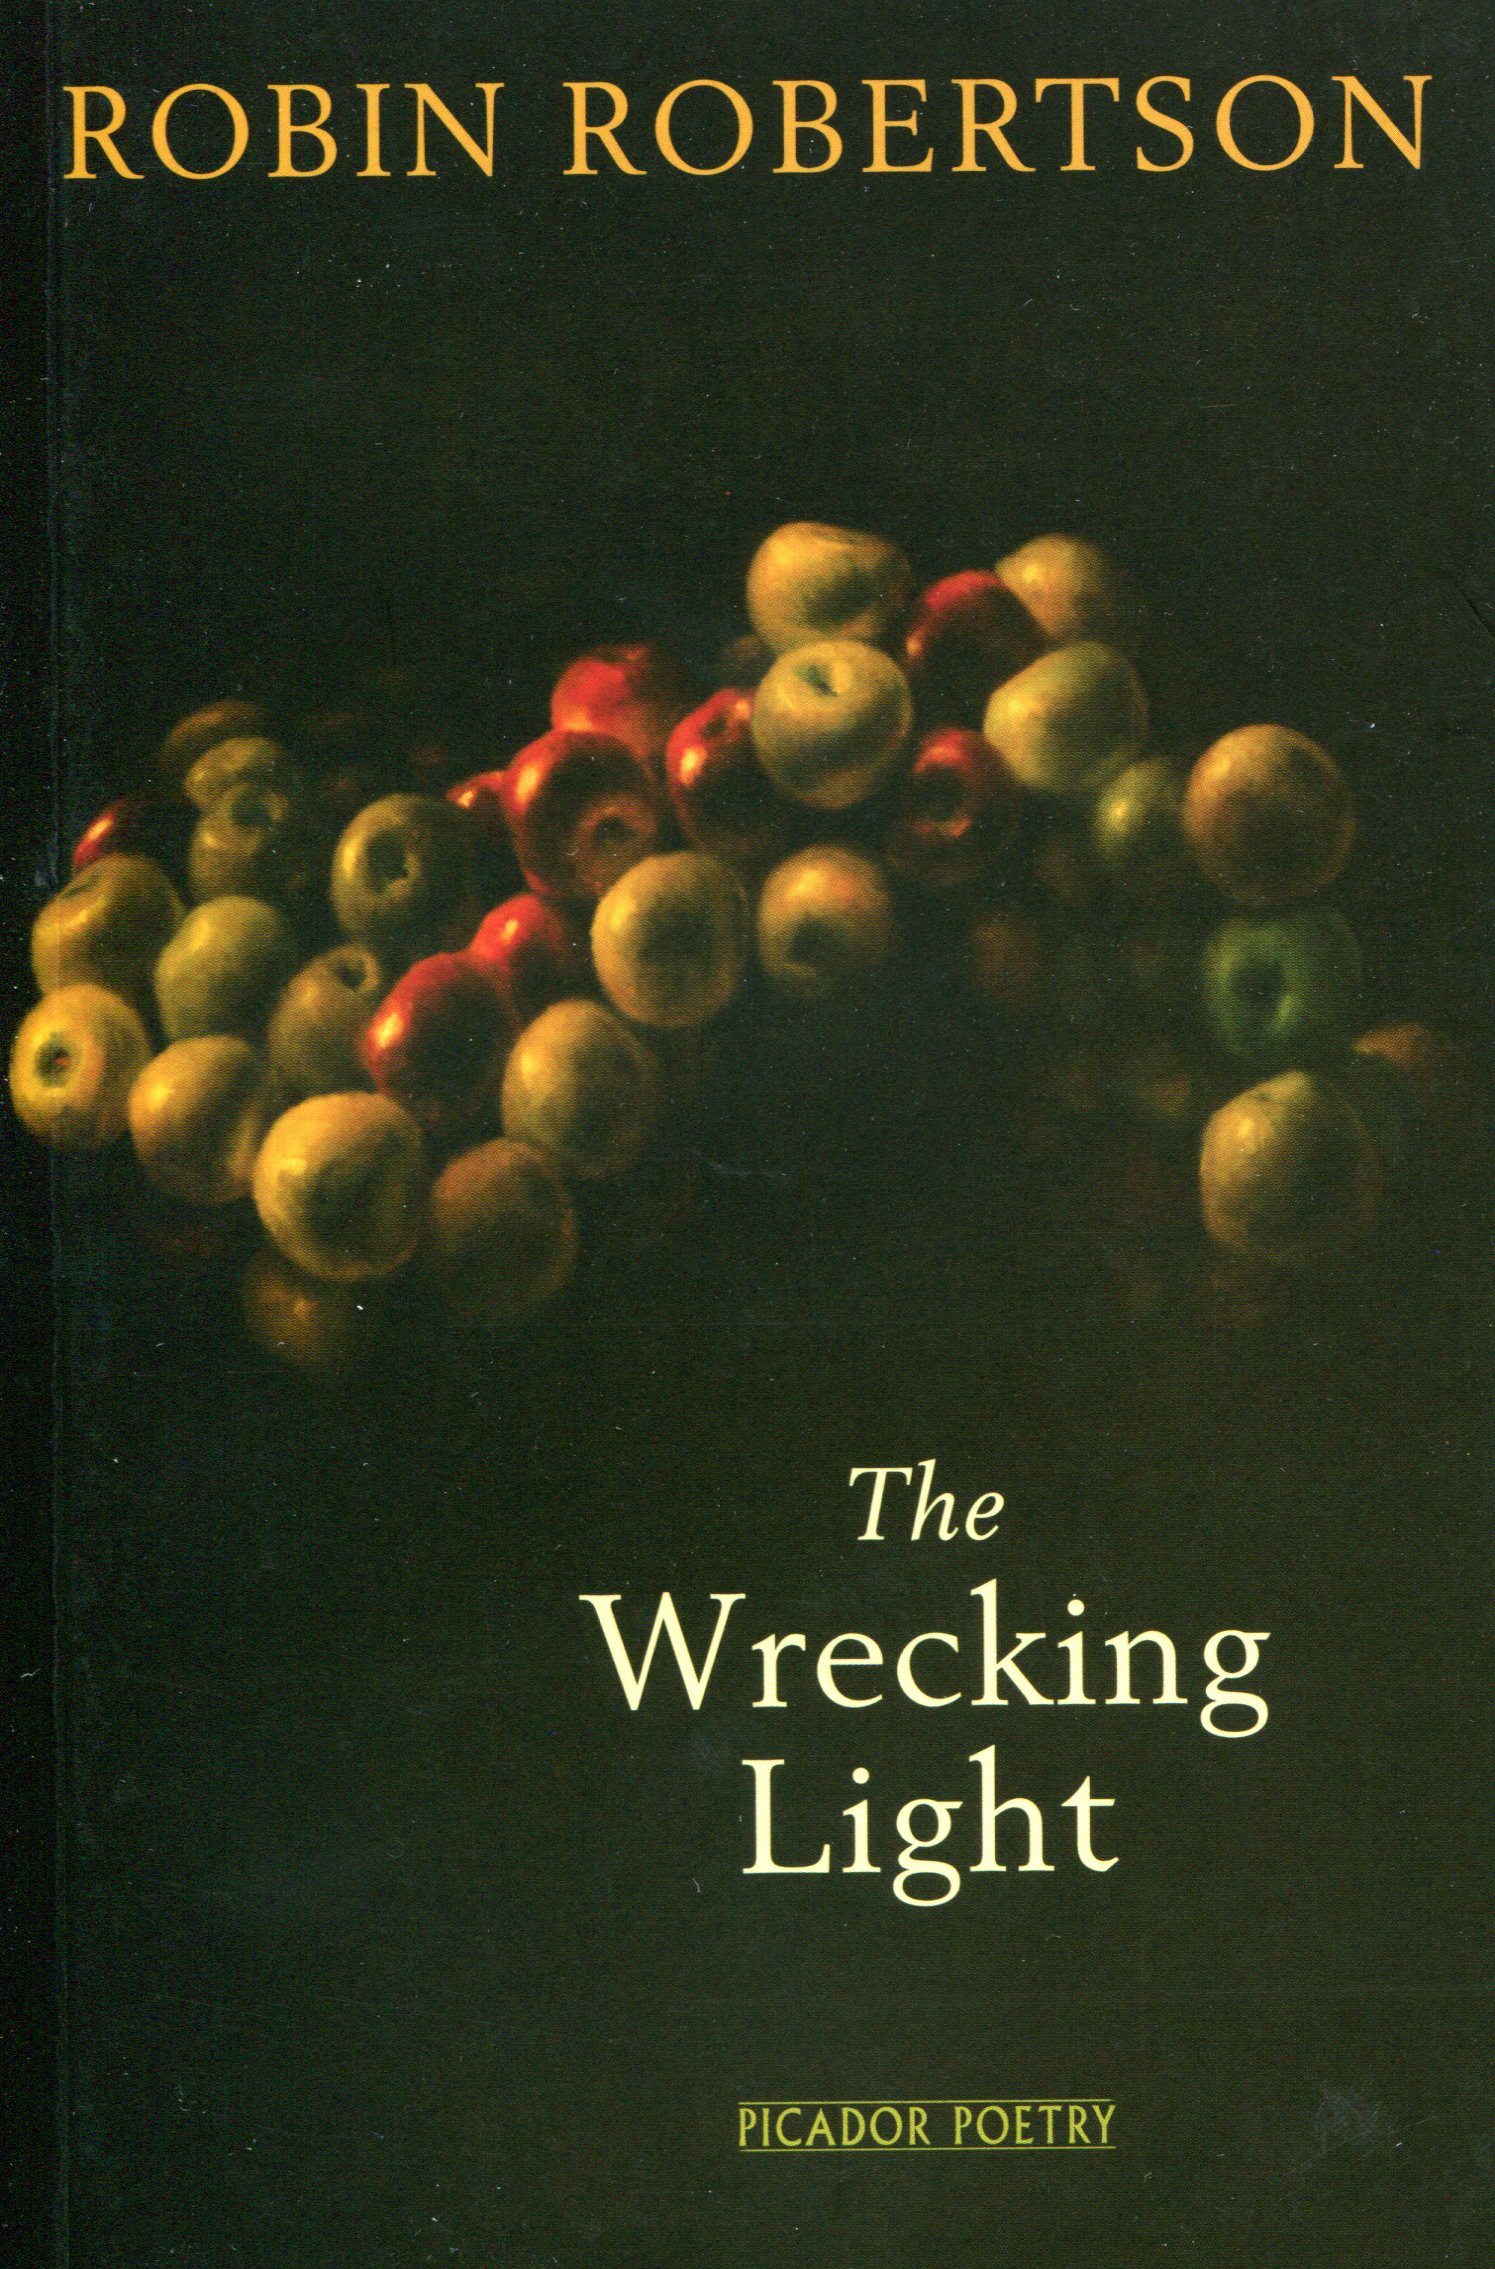 The Wrecking Light by Robin Robertson